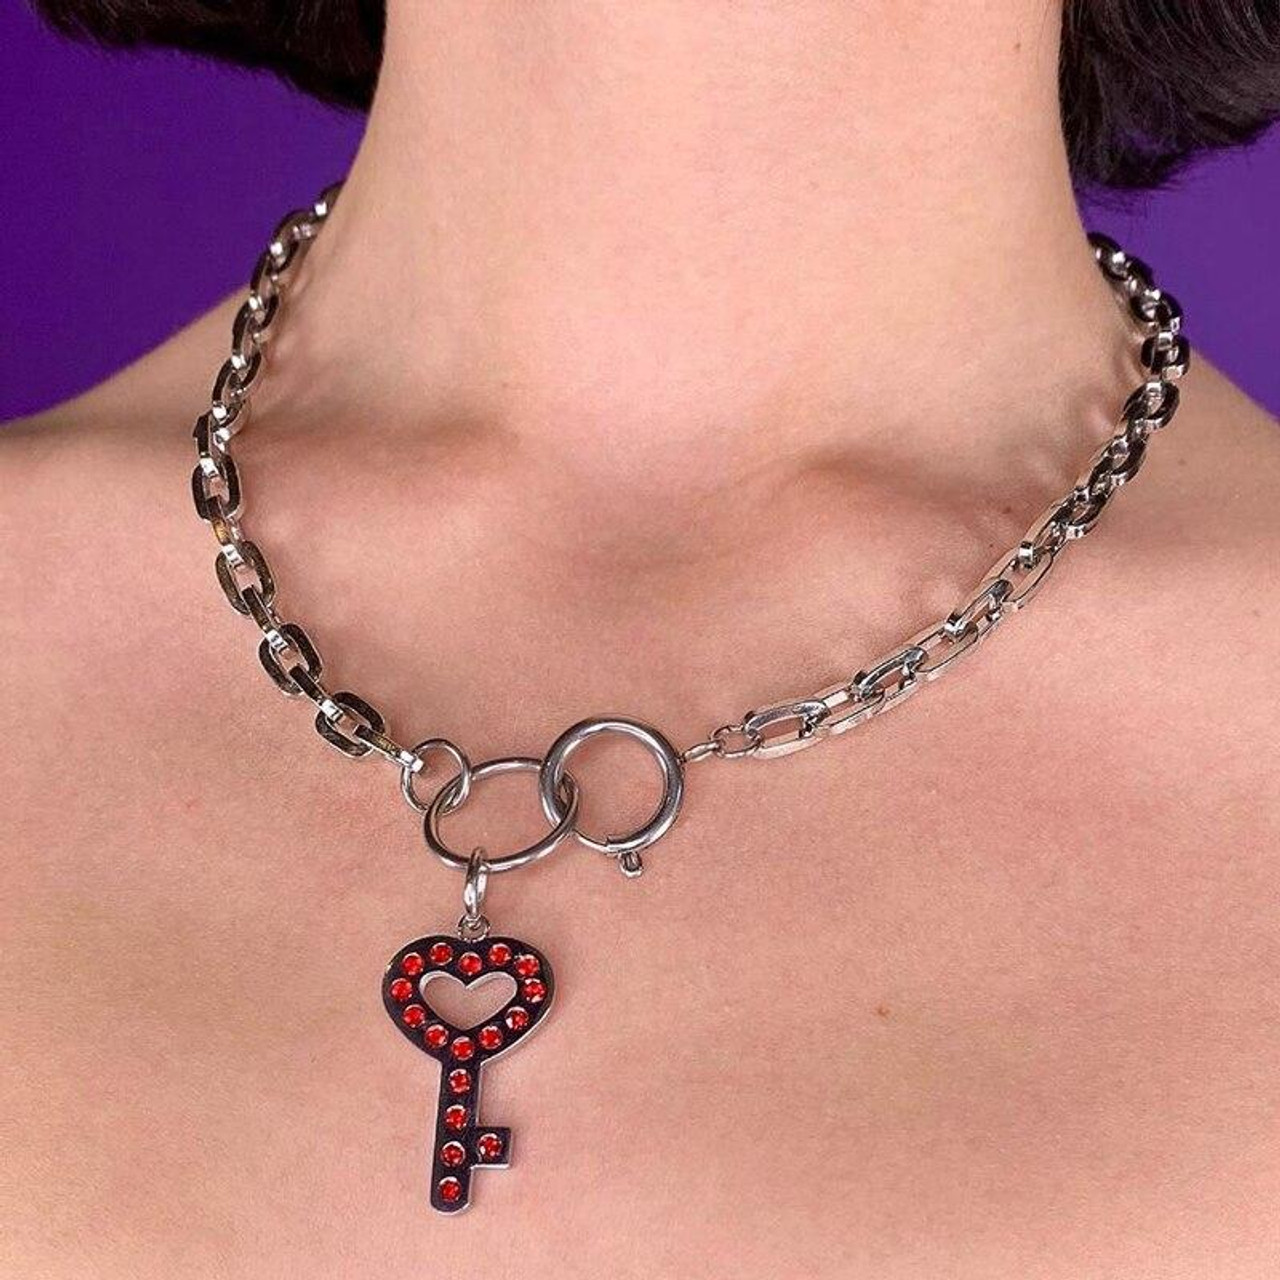 Edgy heart key chain necklace